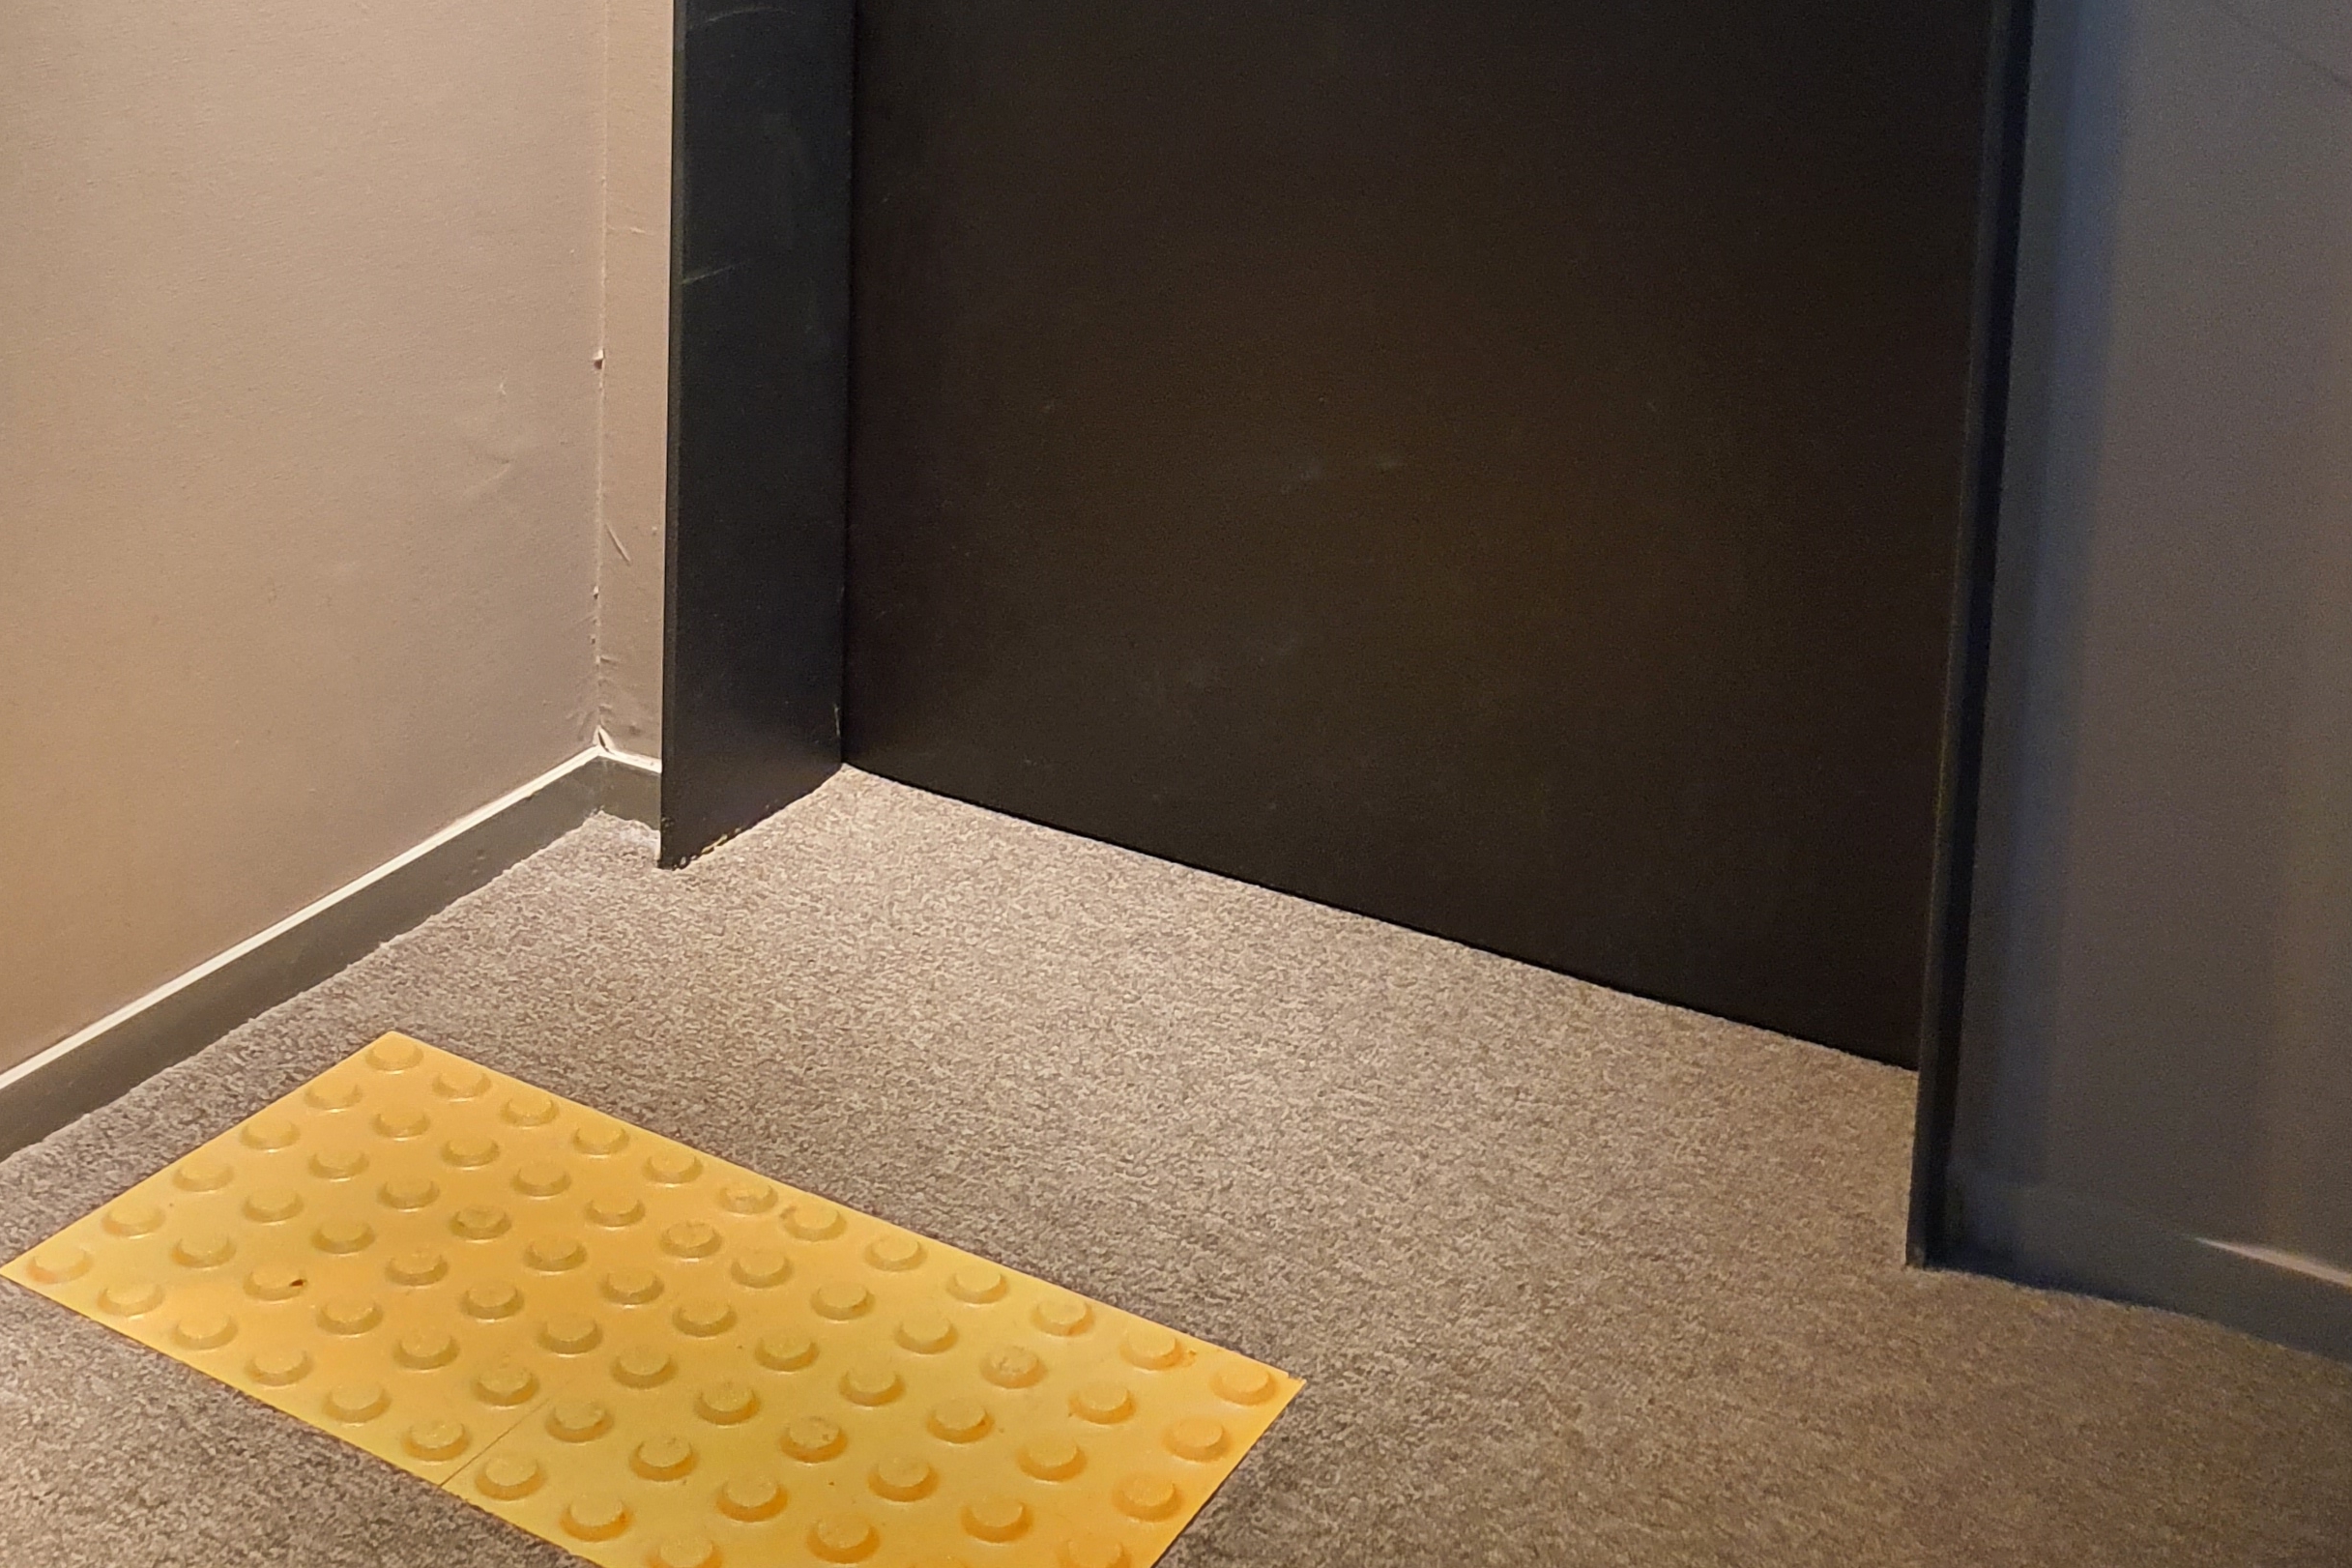 Accessible guestroom0 : Tactile paving installed in front of the guestroom door